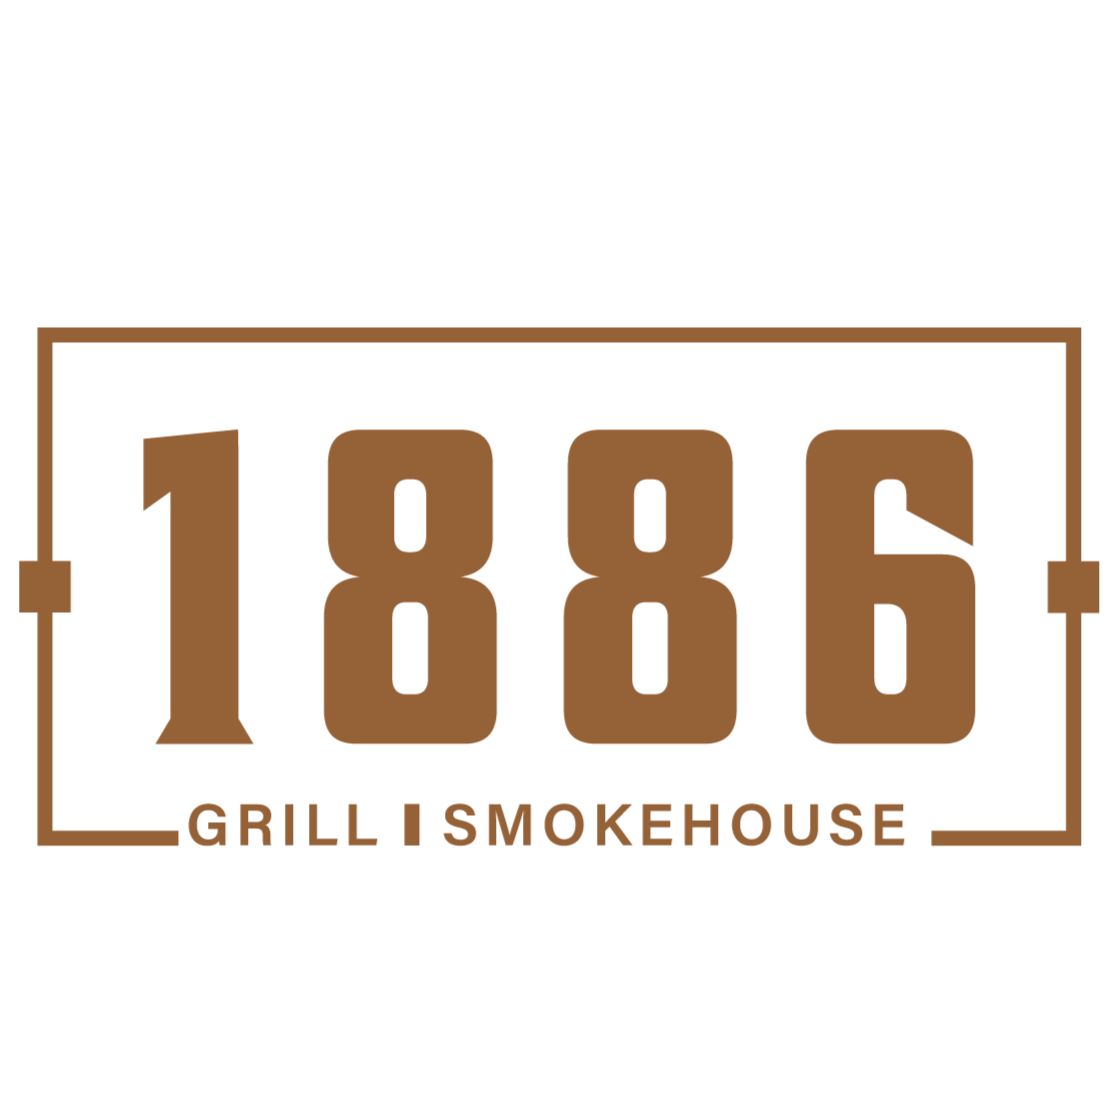 1886 Grill | Smokehouse - Midway, UT 84049 - (435)227-5385 | ShowMeLocal.com